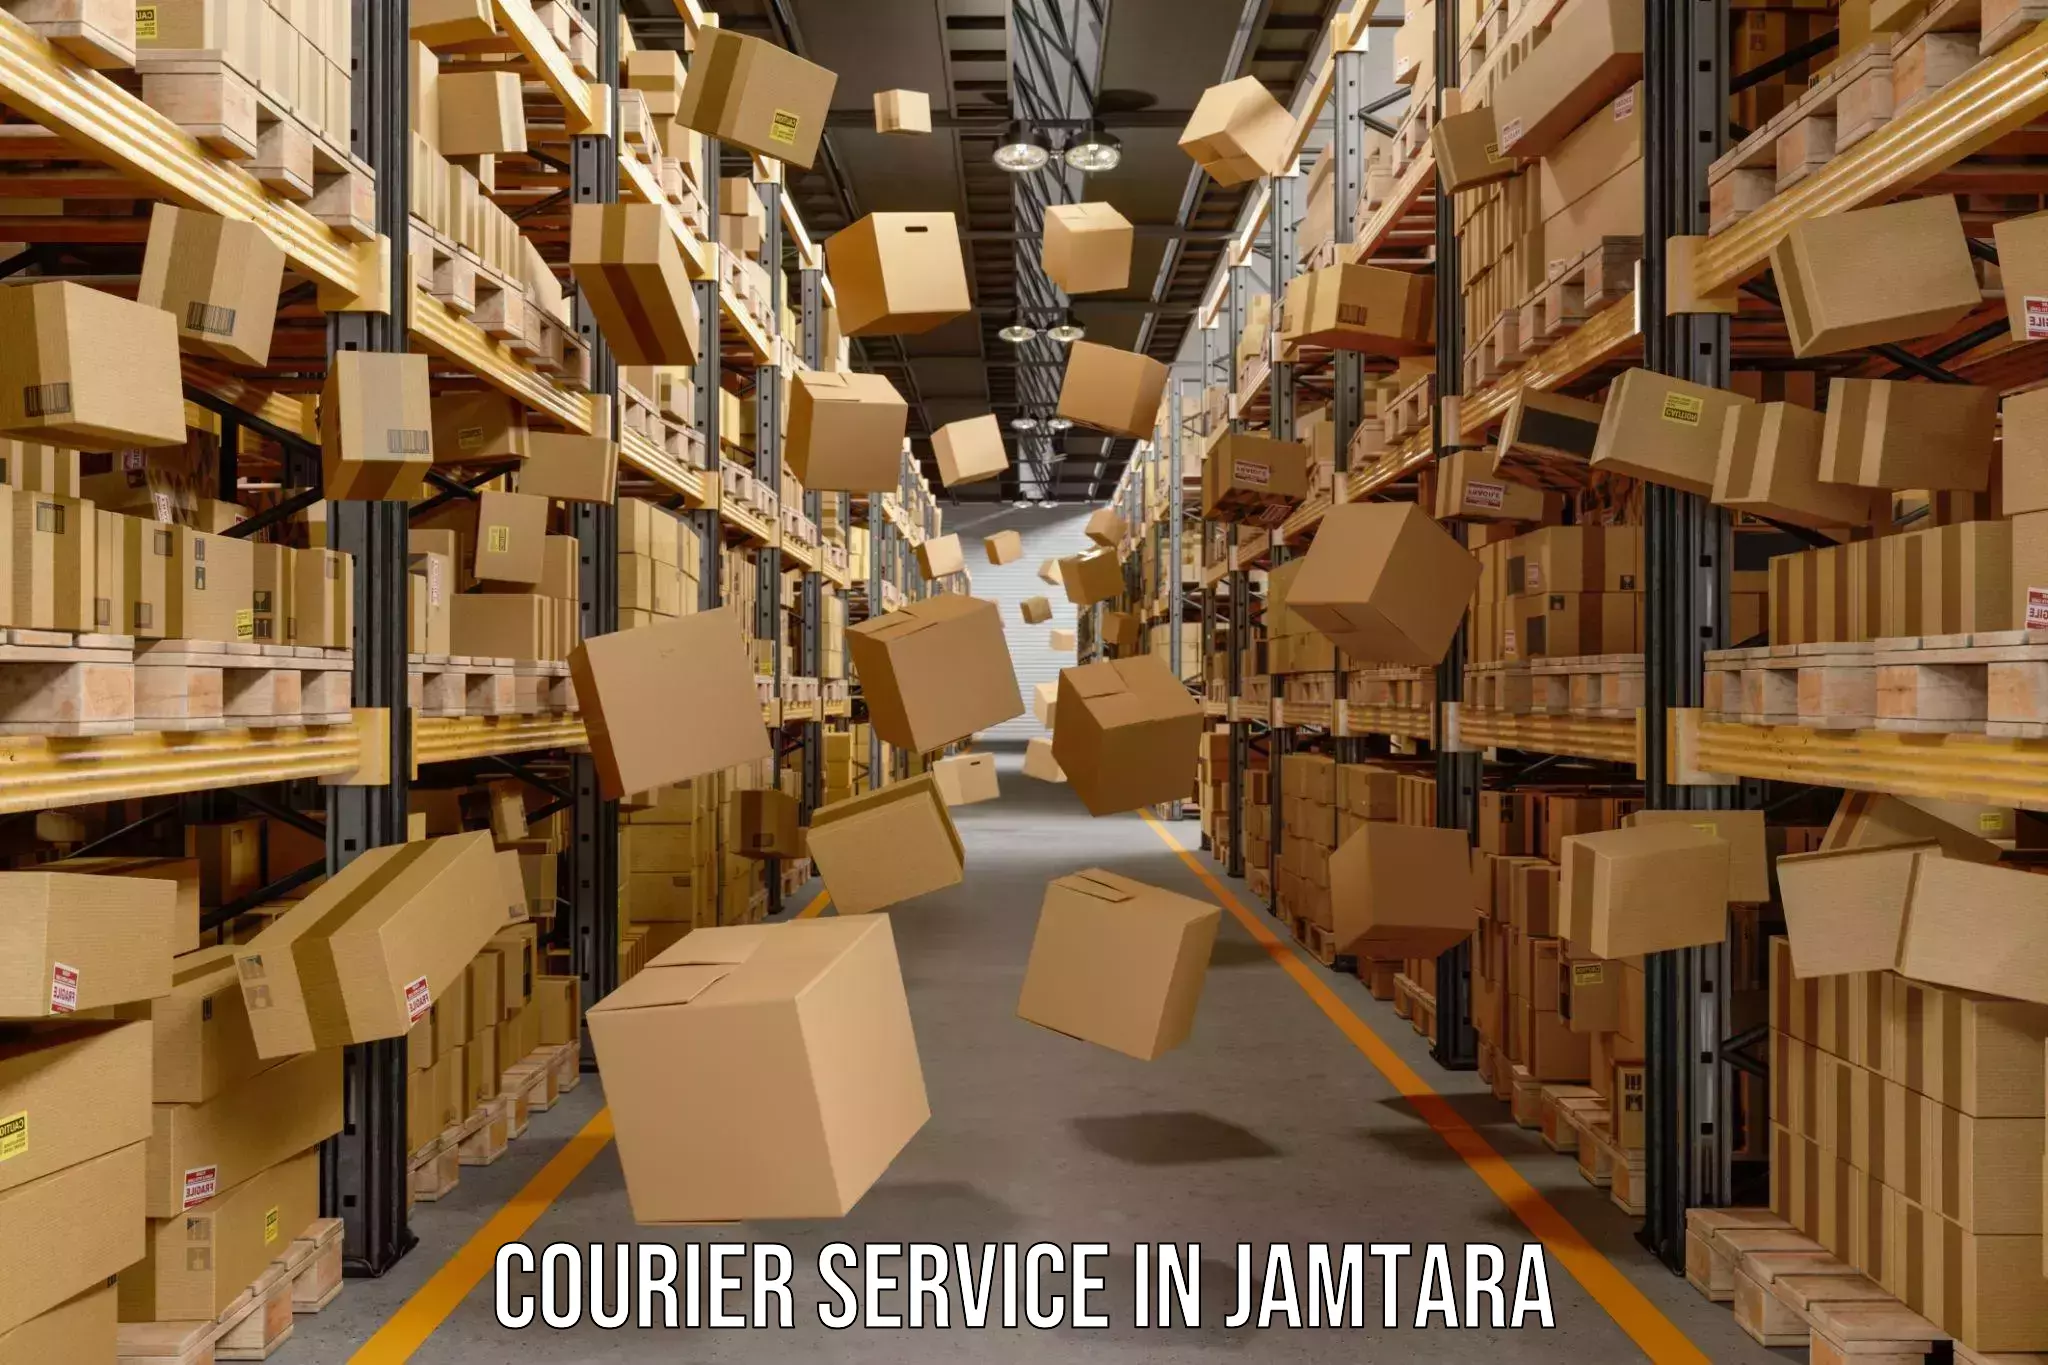 Courier service booking in Jamtara